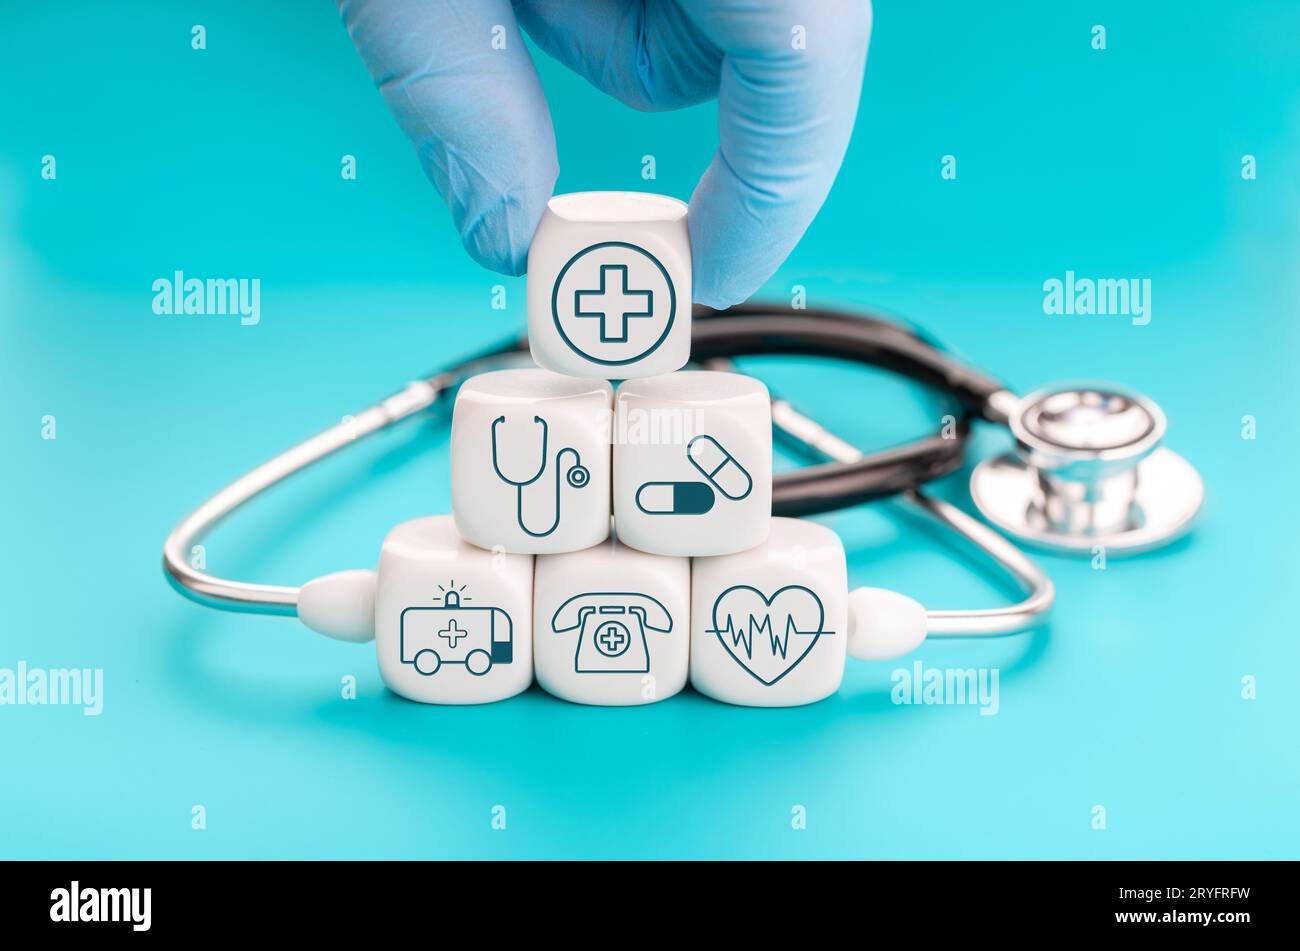 Health insurance concept. Medical symbols on cube shape blocks and Hand holding a block with healthcare medical icon Stock Photo